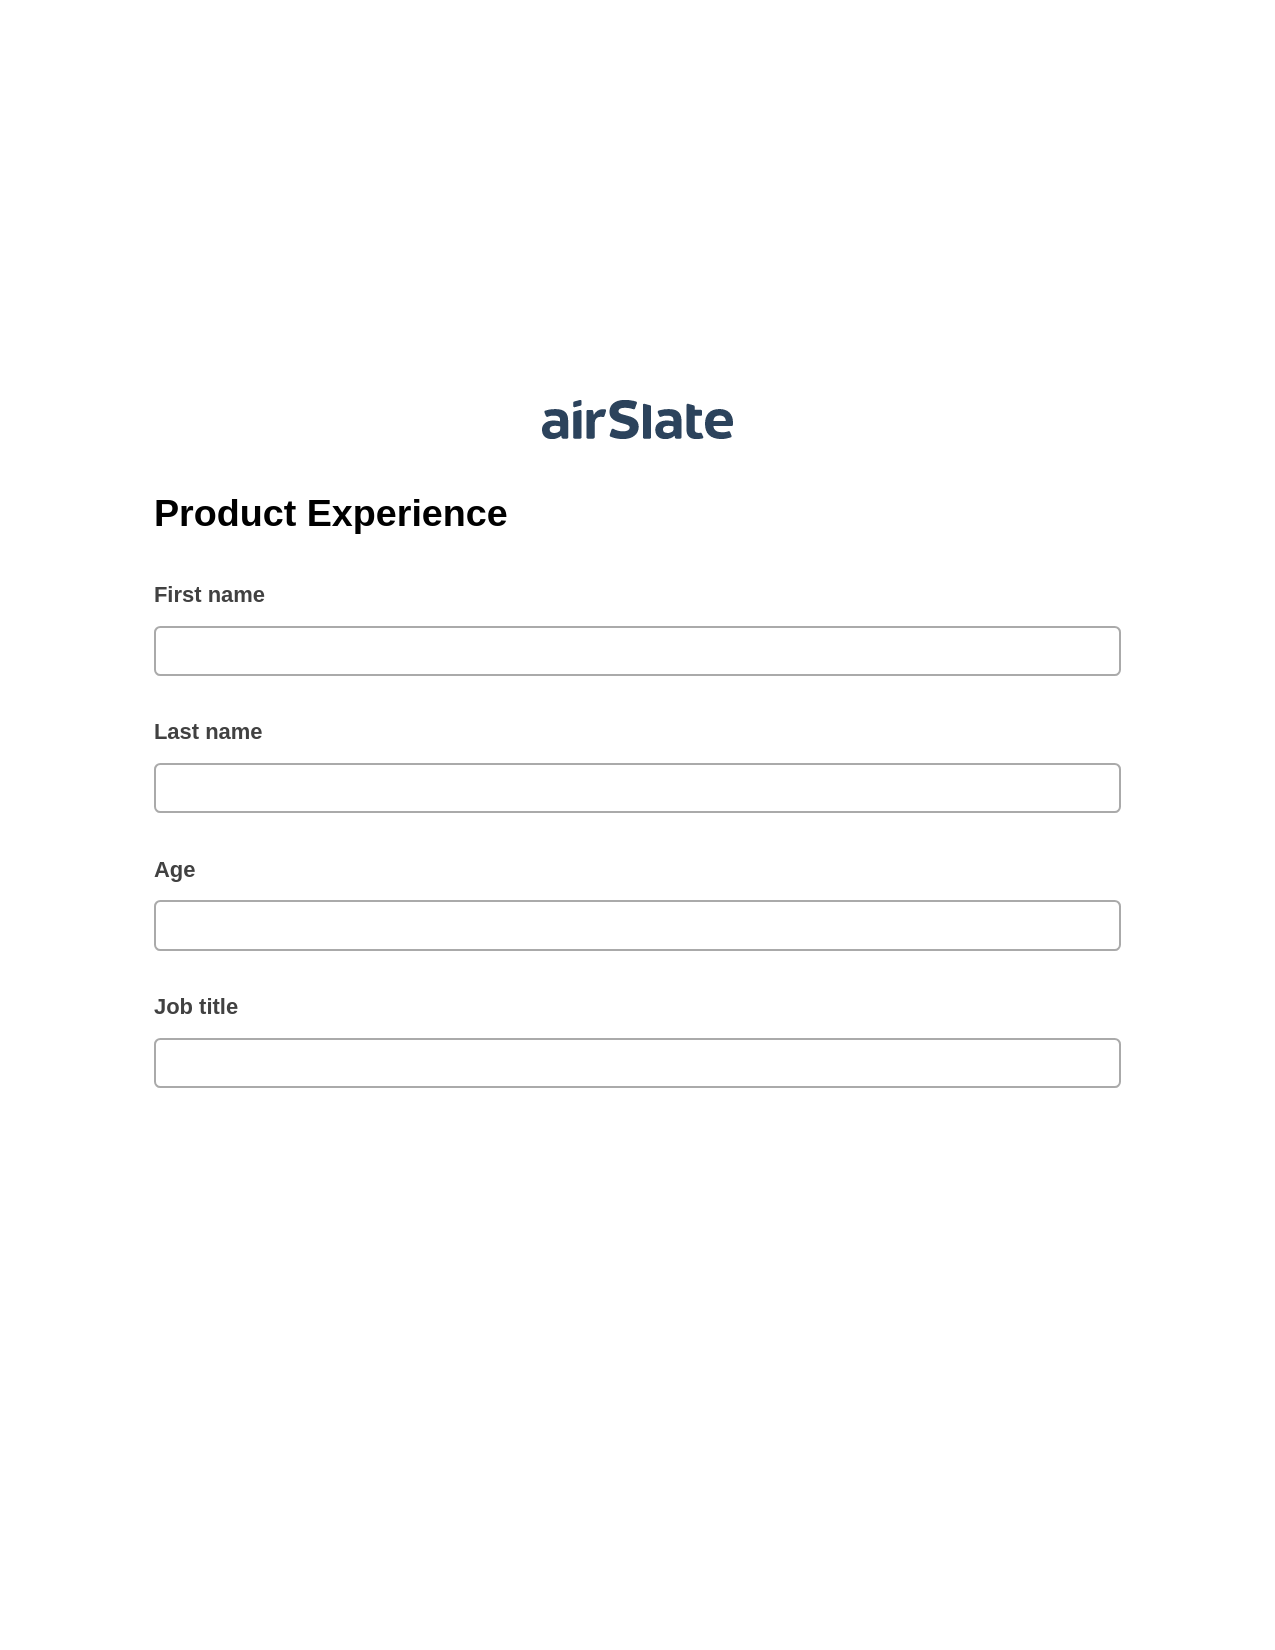 Product Experience Pre-fill Document Bot, Assign Roles to Recipients Bot, Export to Excel 365 Bot